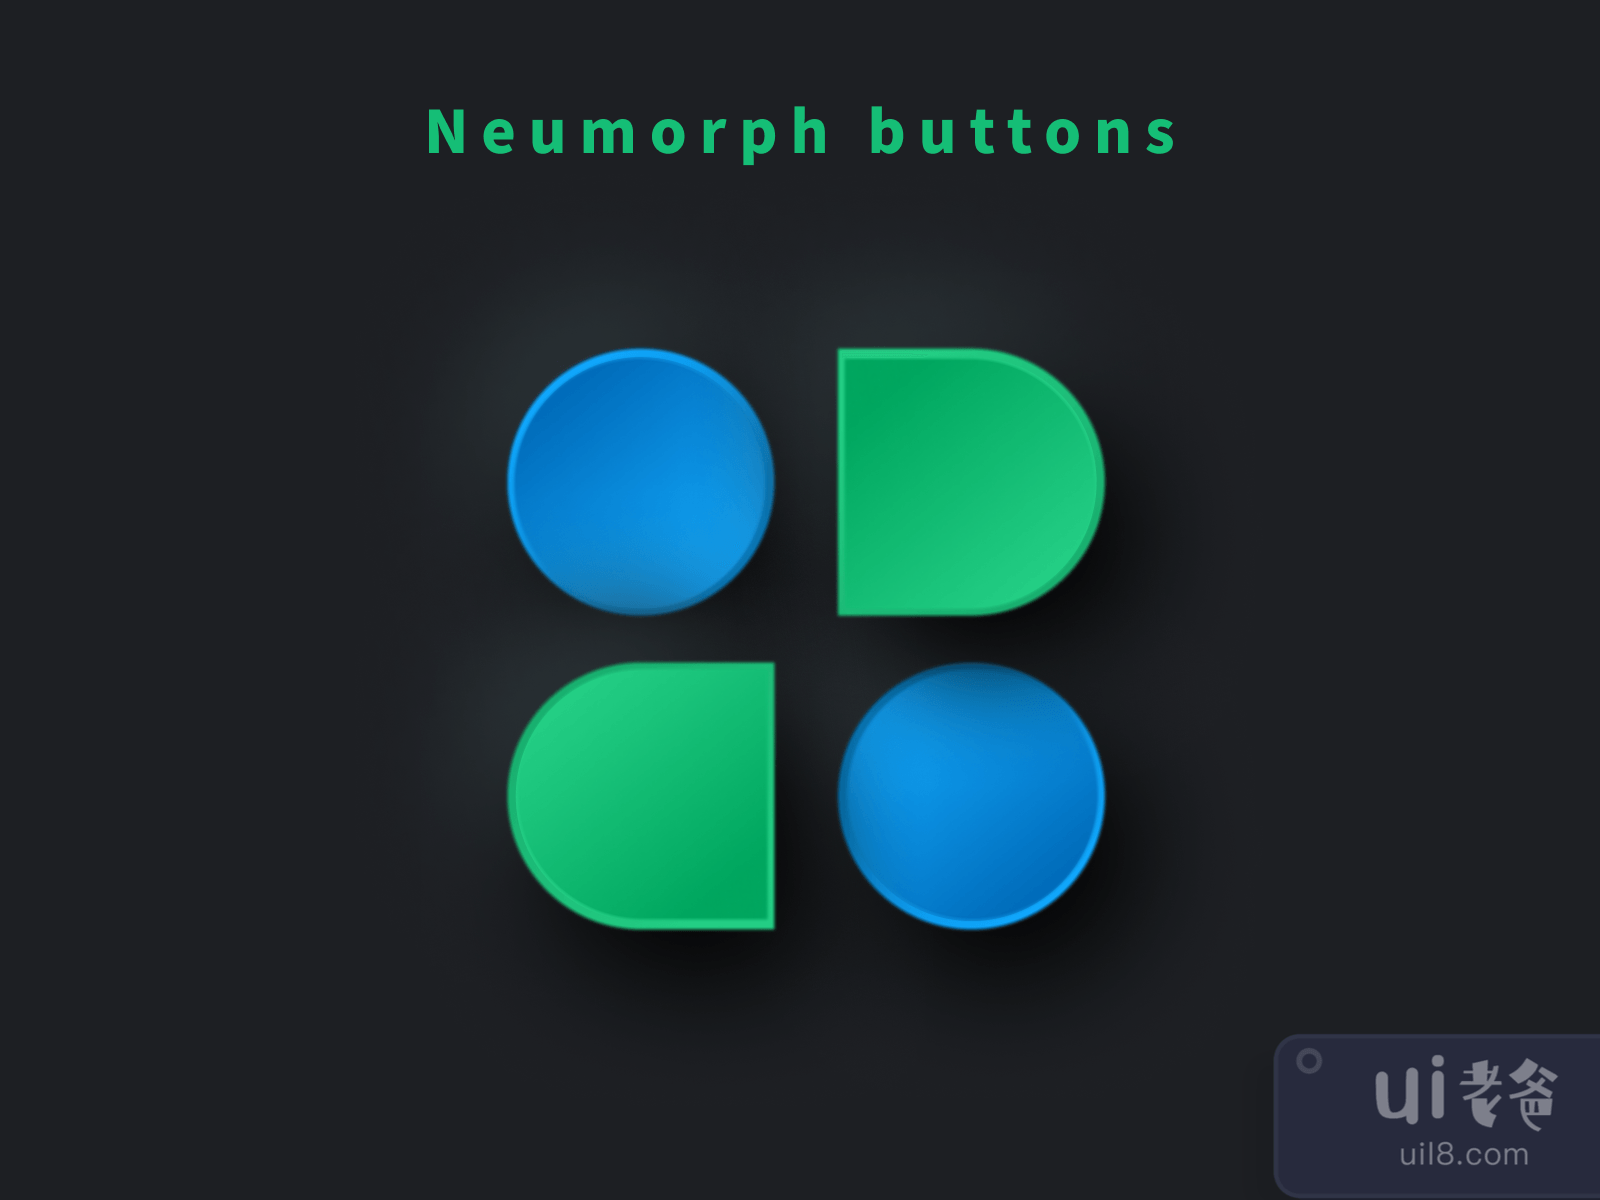 Neumorph Buttons for Figma and Adobe XD No 2